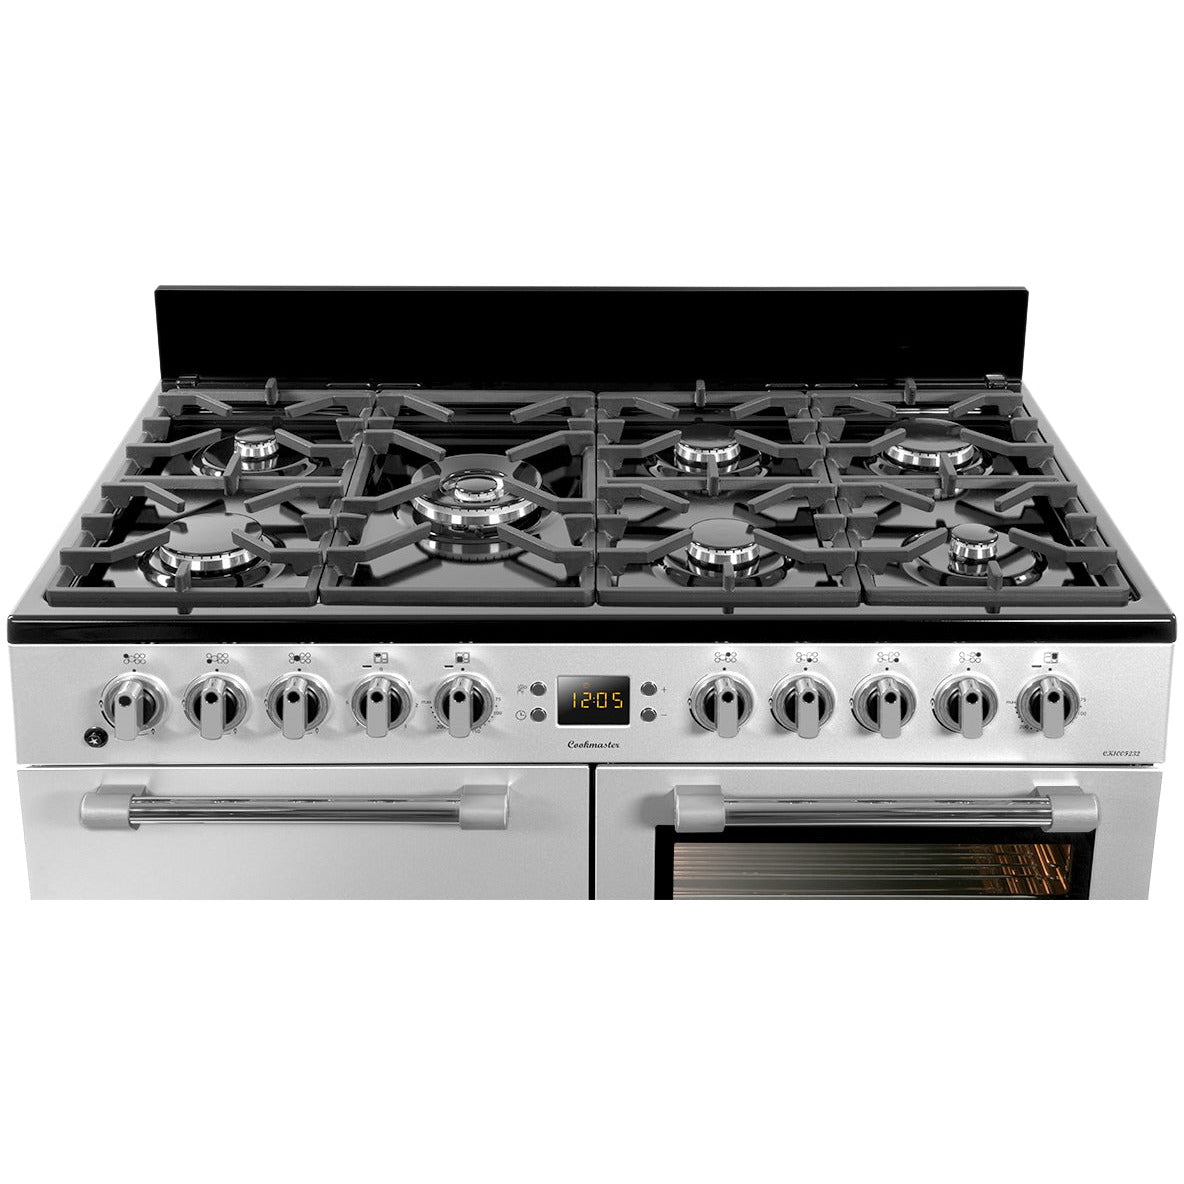 Leisure Cookmaster 100CM Dual Fuel Range Cooker - Silver | CK100F232S (7666673451196)